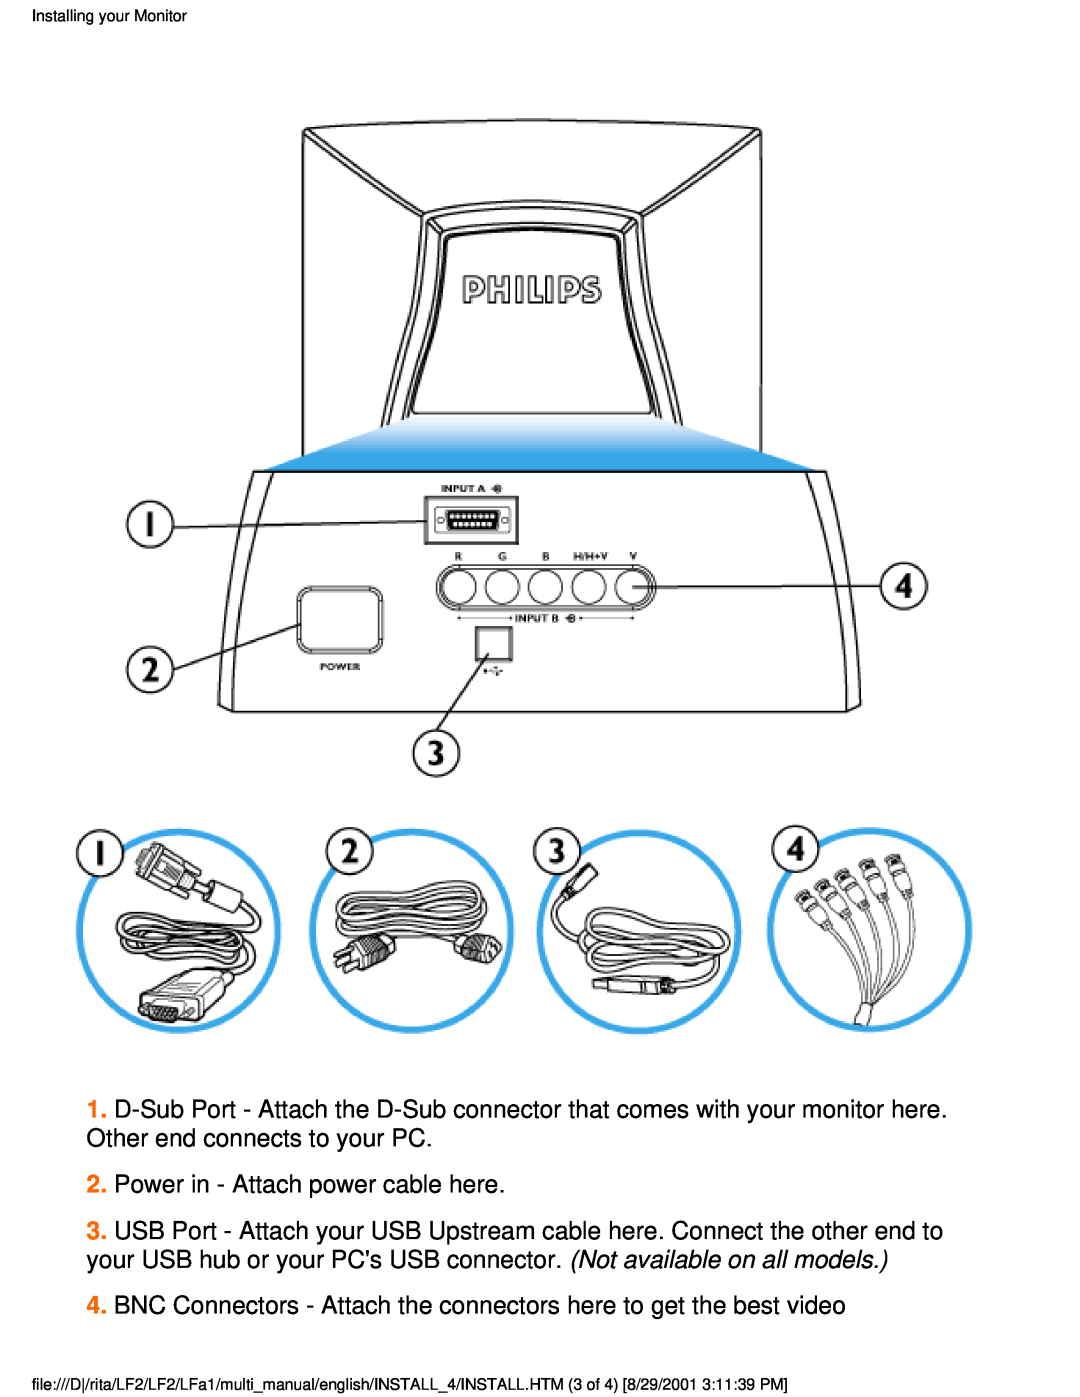 Philips 201B user manual Power in - Attach power cable here 